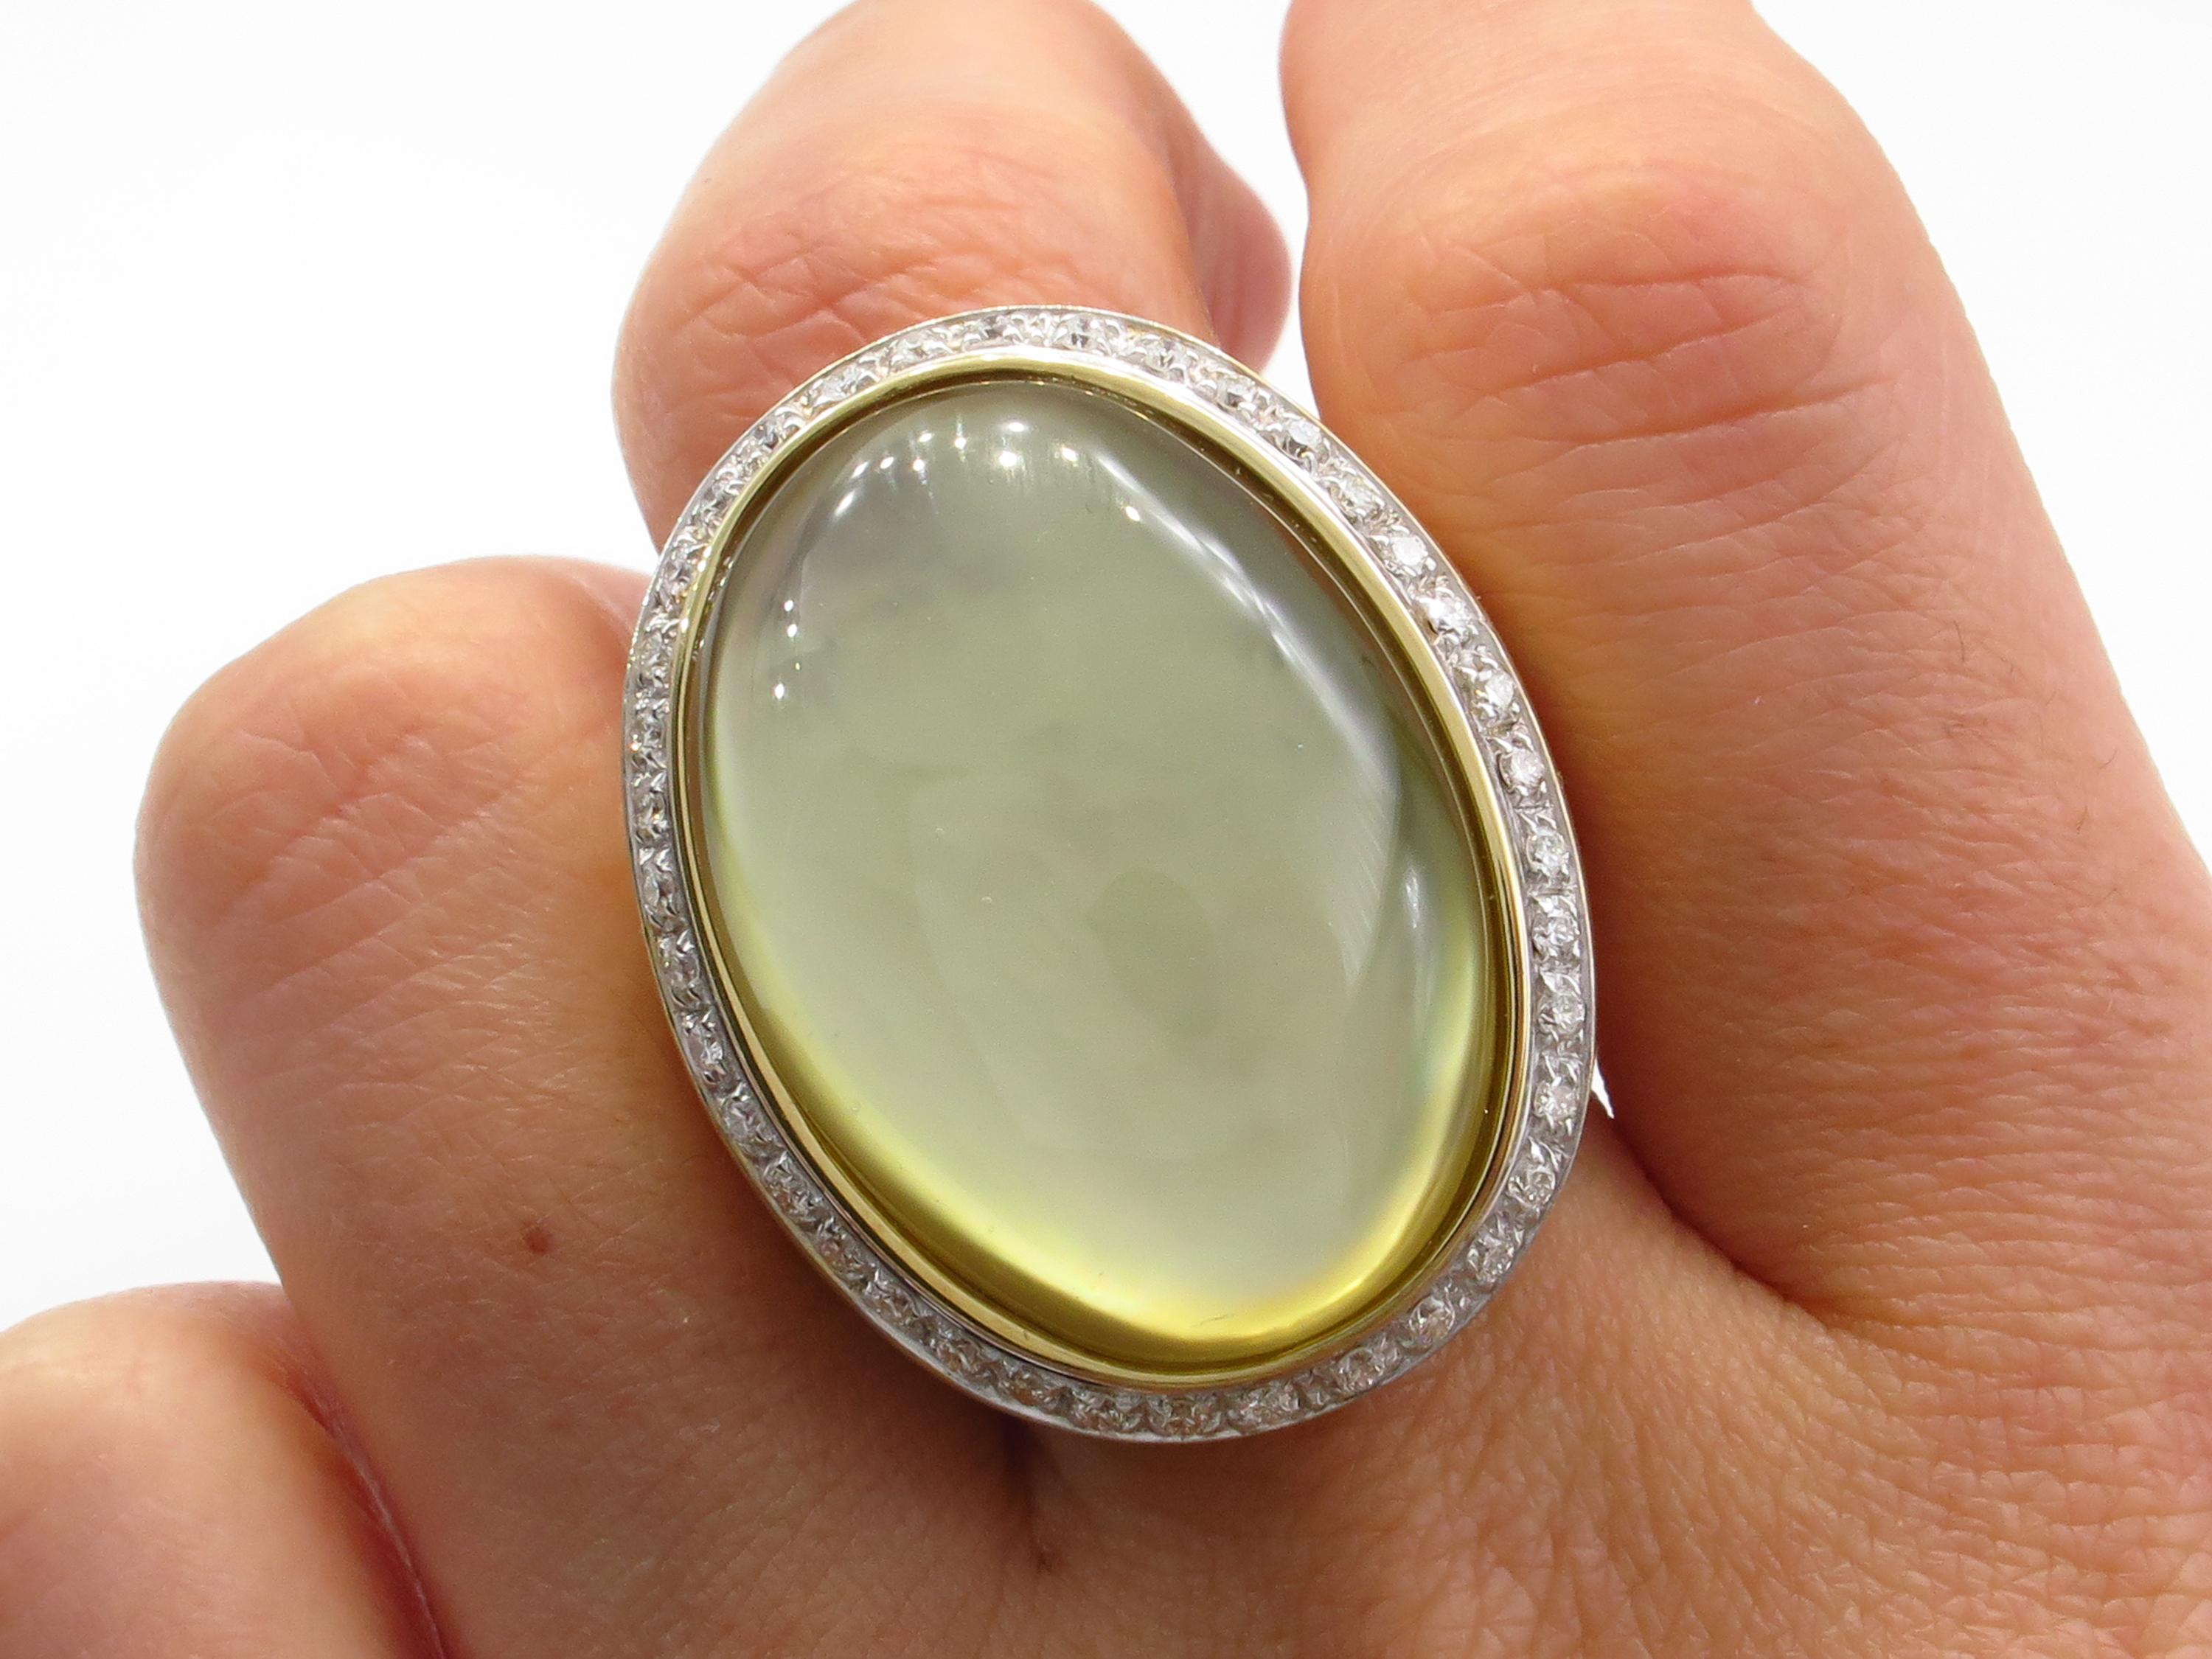 Bold and Fashionable Lemon QUARTZ over Mother-of-Pearl Ring with DIAMONDS in bright and rich 18k Yellow Gold.

A real fun Statement jewel, a gear Right Hand or Anniversary Ring! From our Estate Collection. The ring is in 18K Yellow GOLD with satin